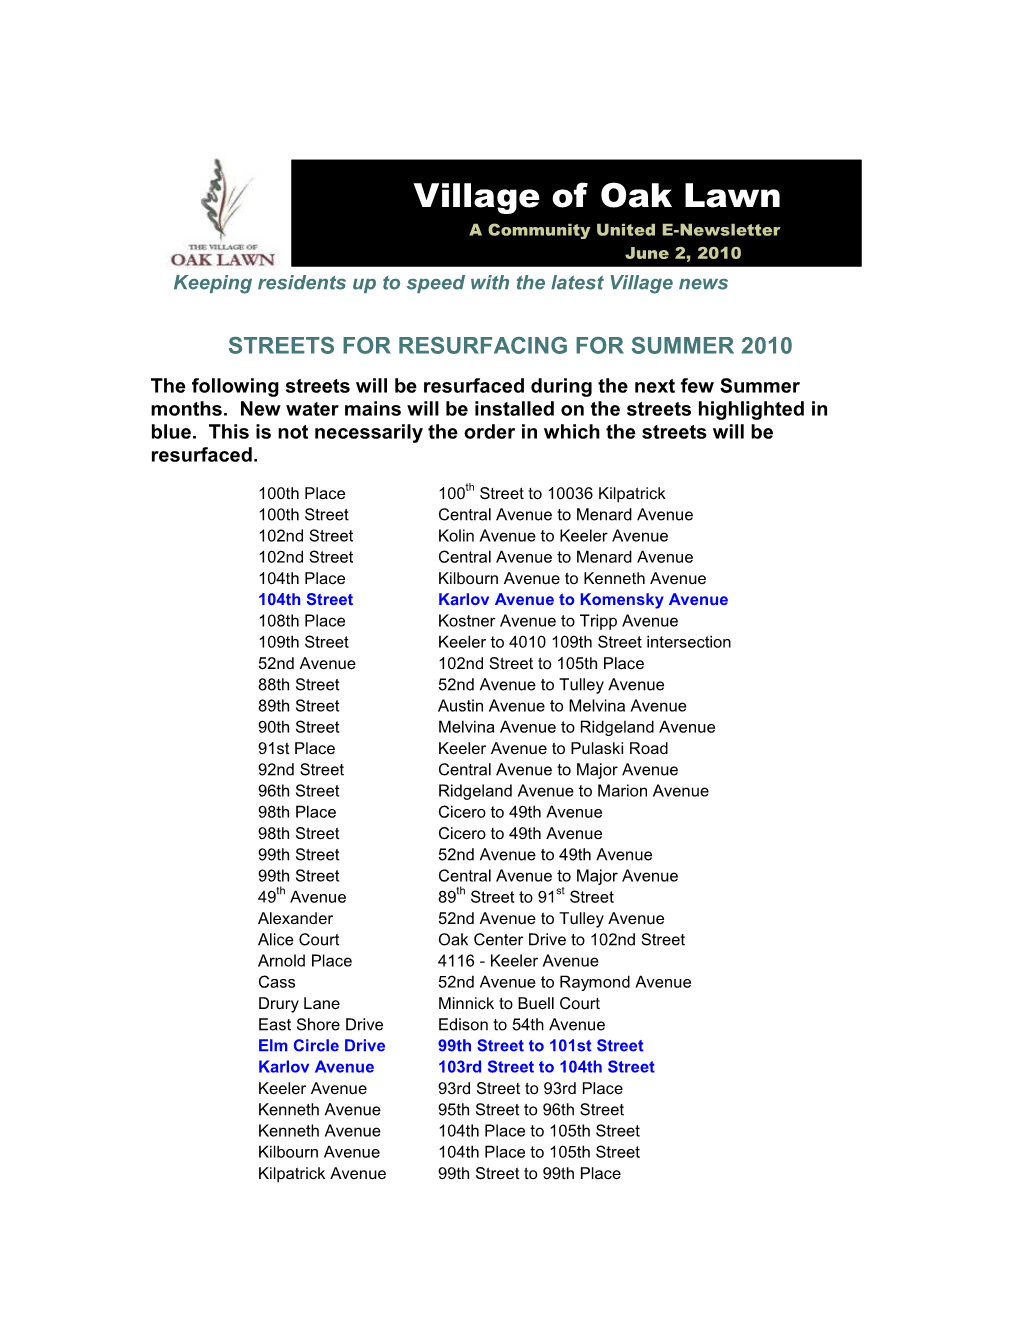 Village of Oak Lawn a Community United E-Newsletter June 2, 2010 Keeping Residents up to Speed with the Latest Village News